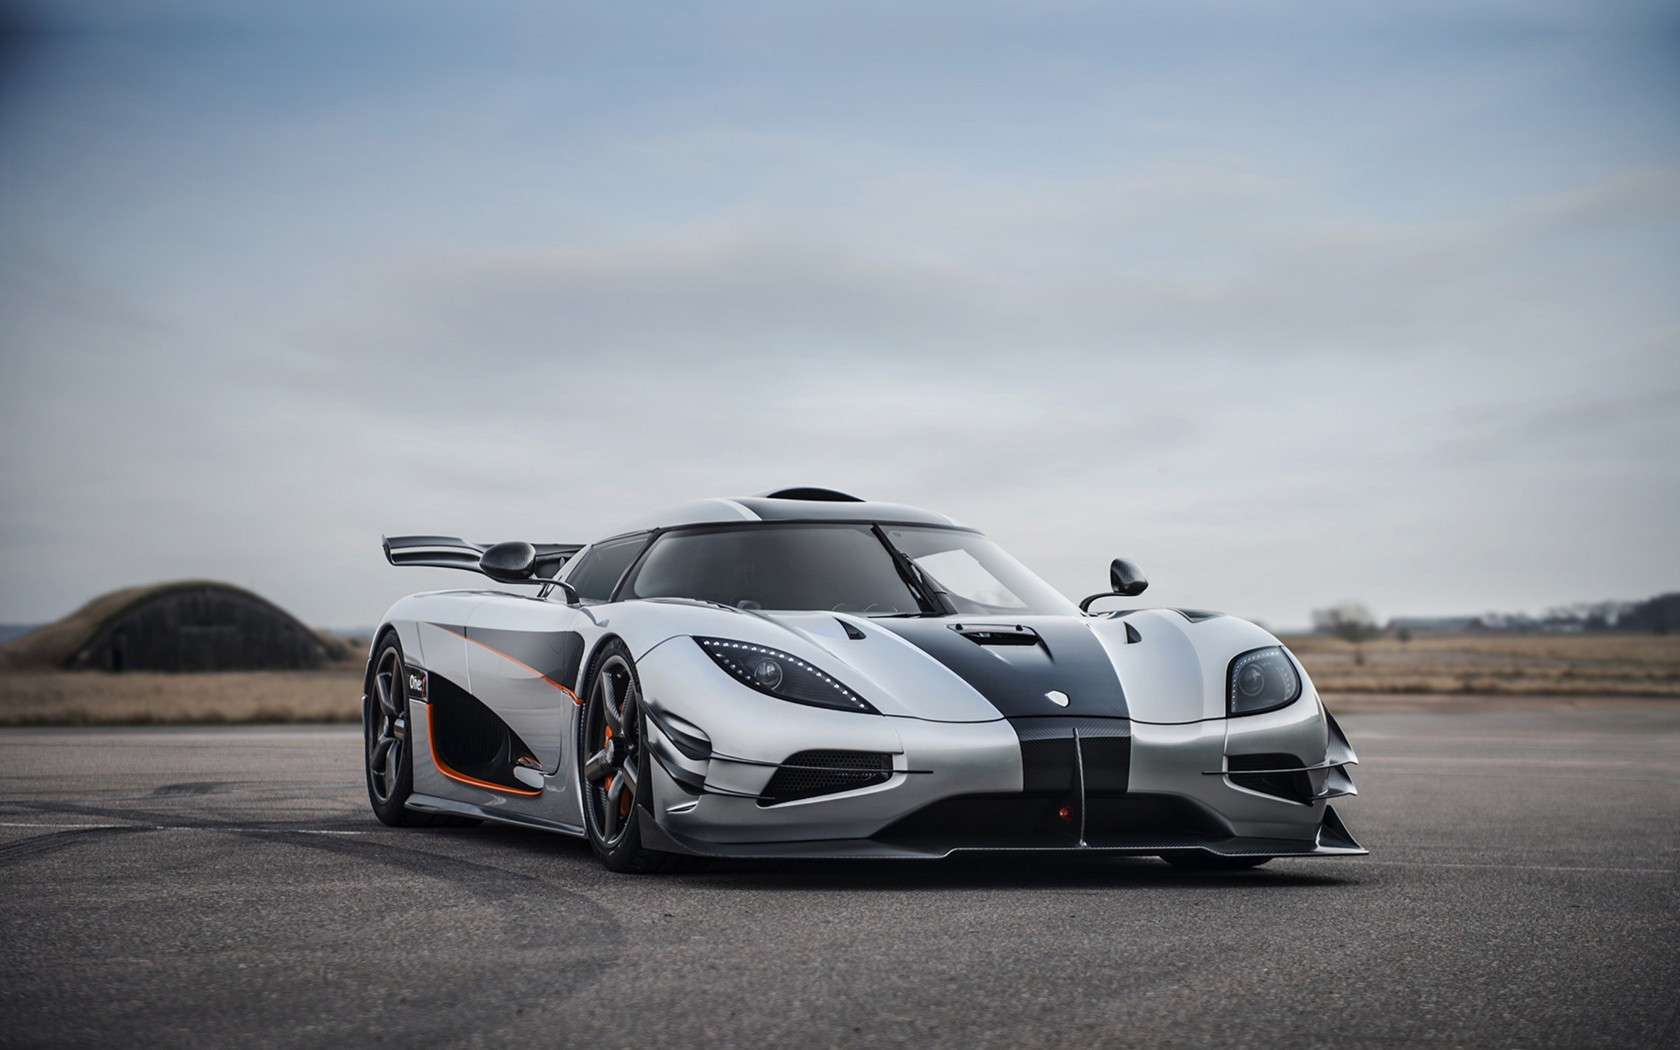 Download 1680x1050 Koenigsegg Agera, Supercar, Front View, Cars Wallpaper for MacBook Pro 15 inch